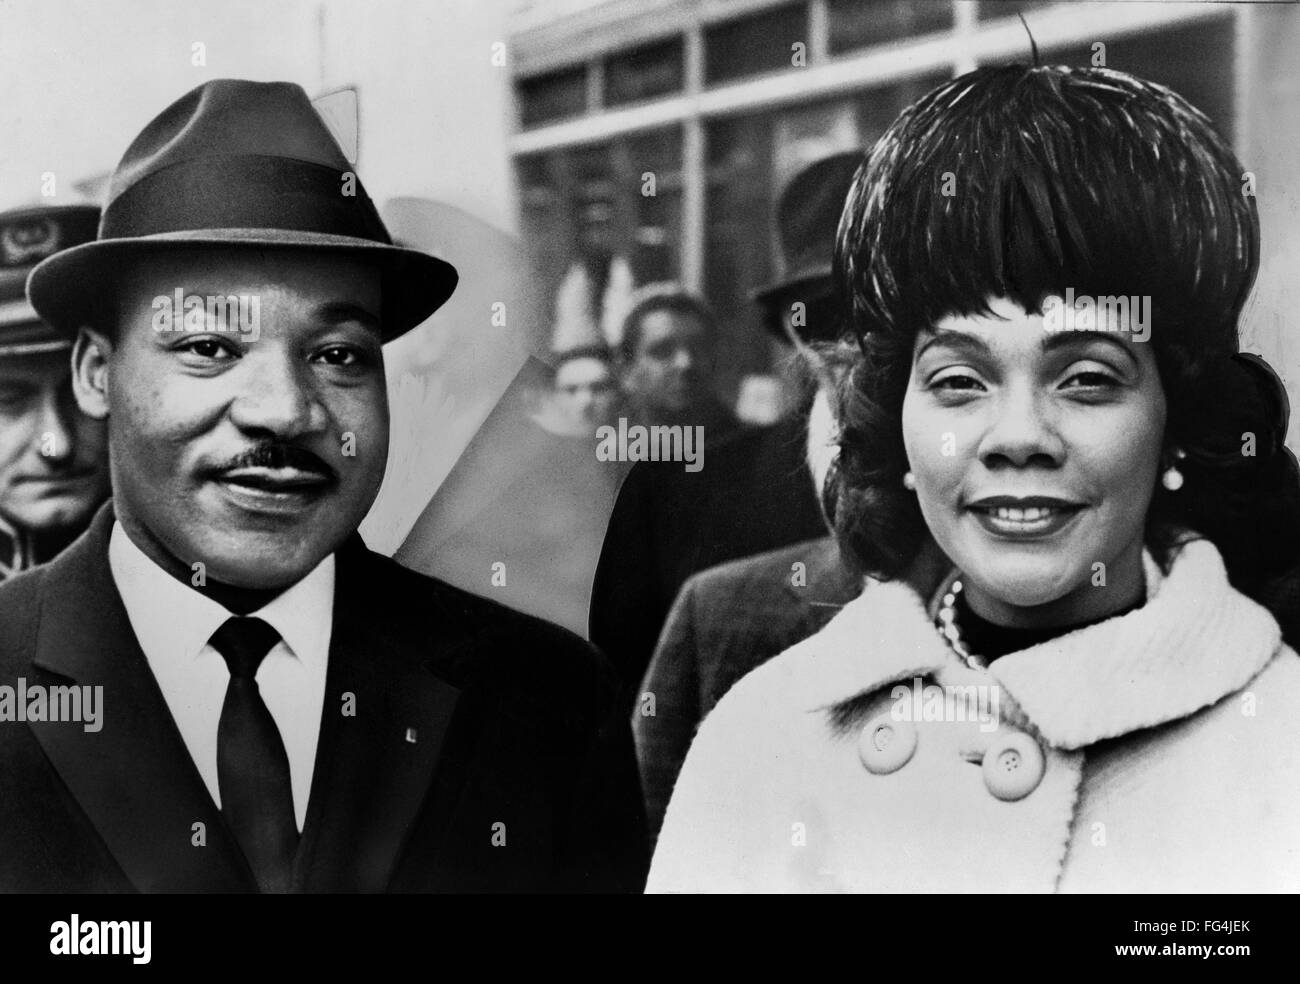 MARTIN LUTHER KING, JR. /n(1929-1968). American clergyman and civil rights leader. With his wife Coretta. Photograph by Herman Hiller, 1964. Stock Photo